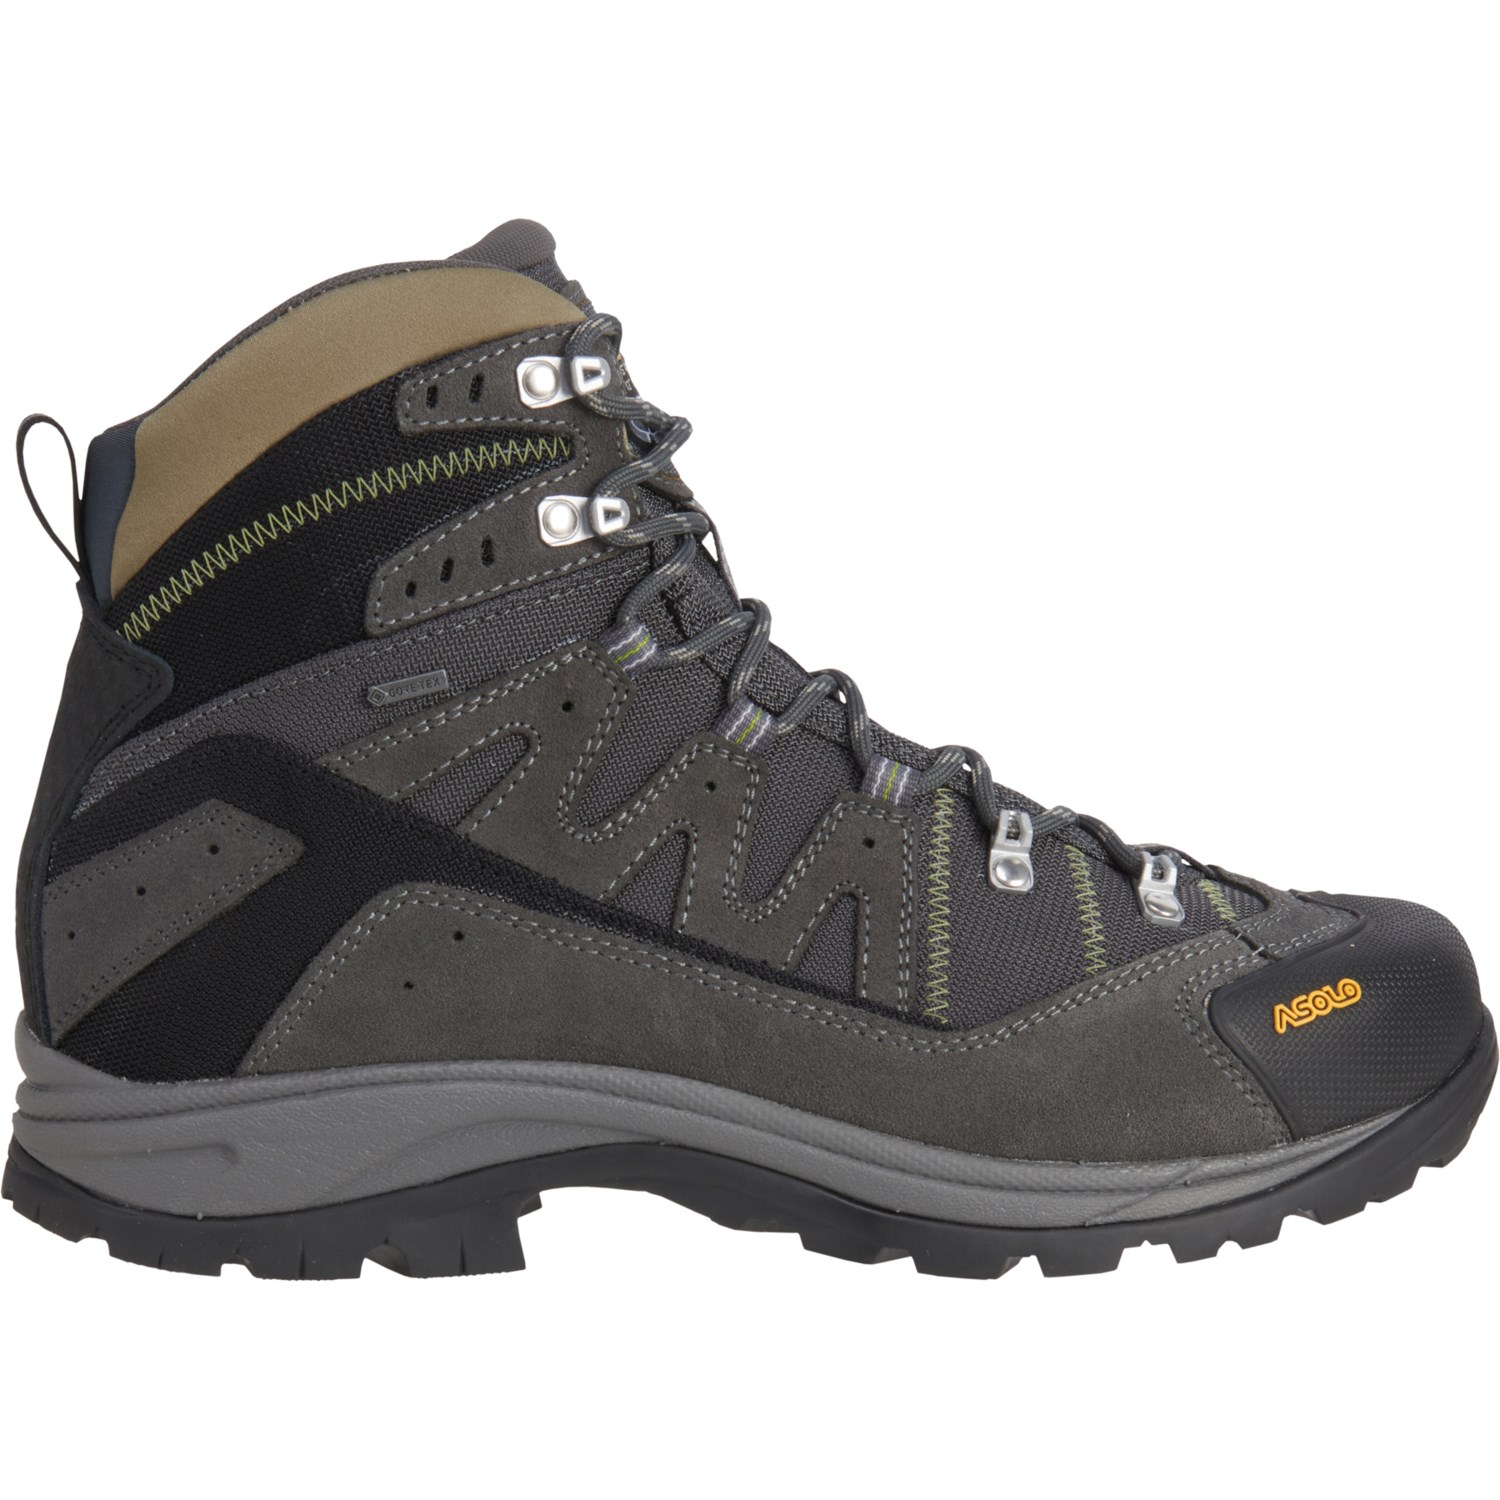 Asolo Made in Europe Neutron Gore-Tex® Hiking Boots (For Men) - Save 43%